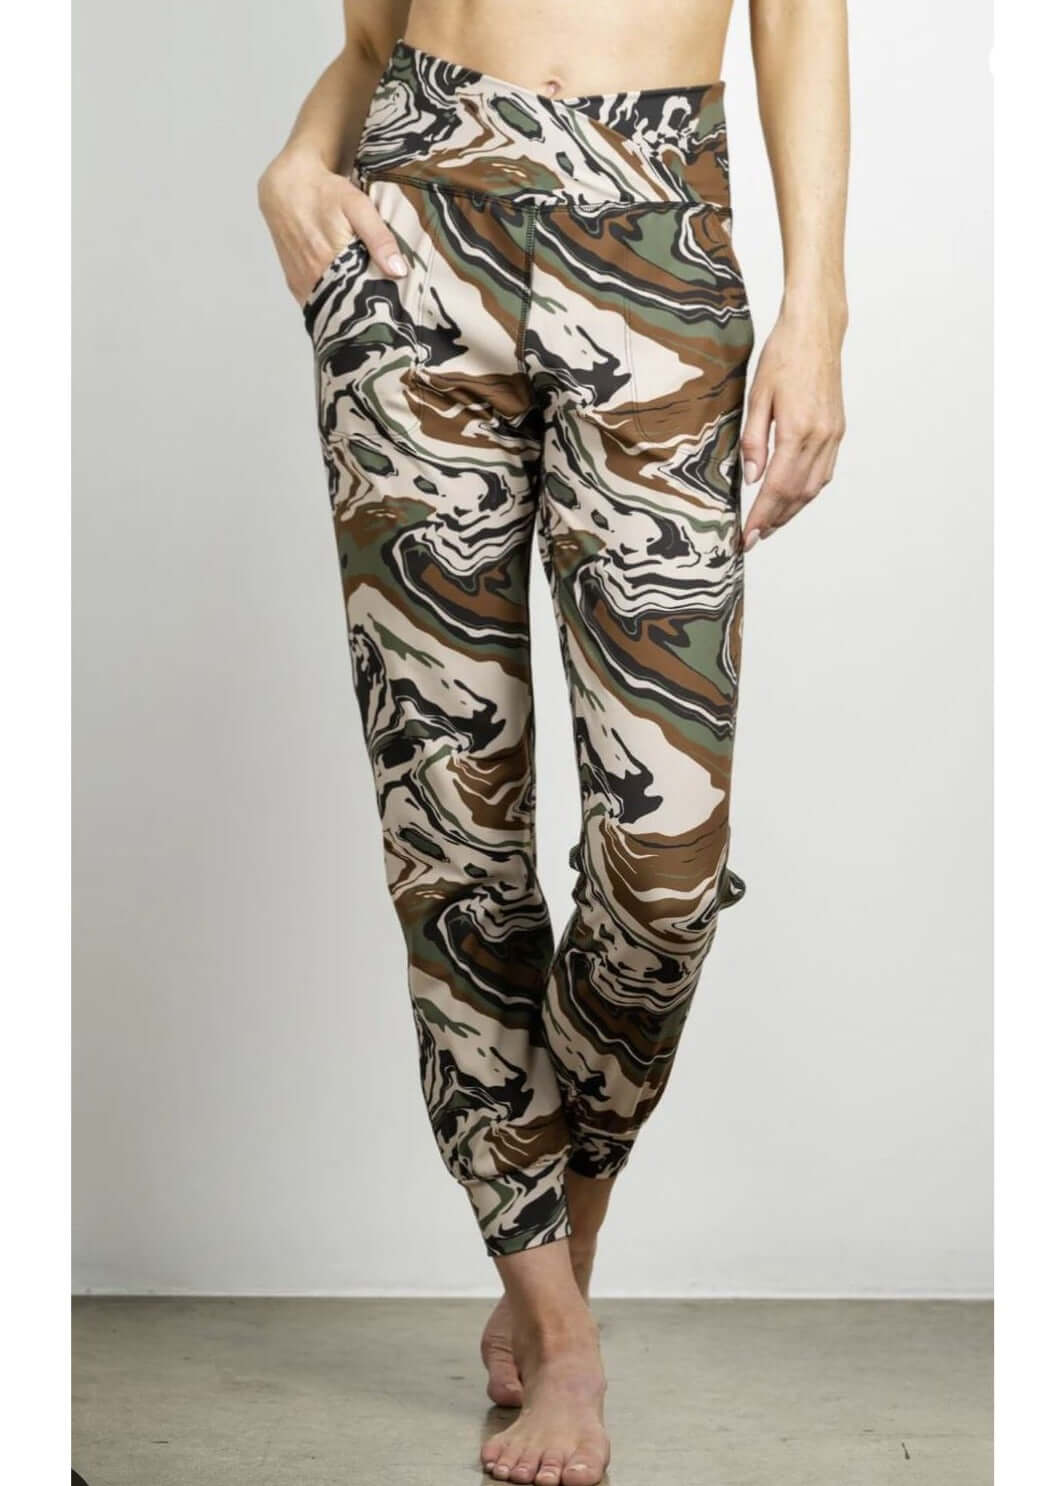 Jala Women's Cross Waist Jogger with Side Pockets Jogger in Camo | Style# CWJ16-CM | Made in USA | Classy Cozy Cool Women's Made in America Clothing Boutique